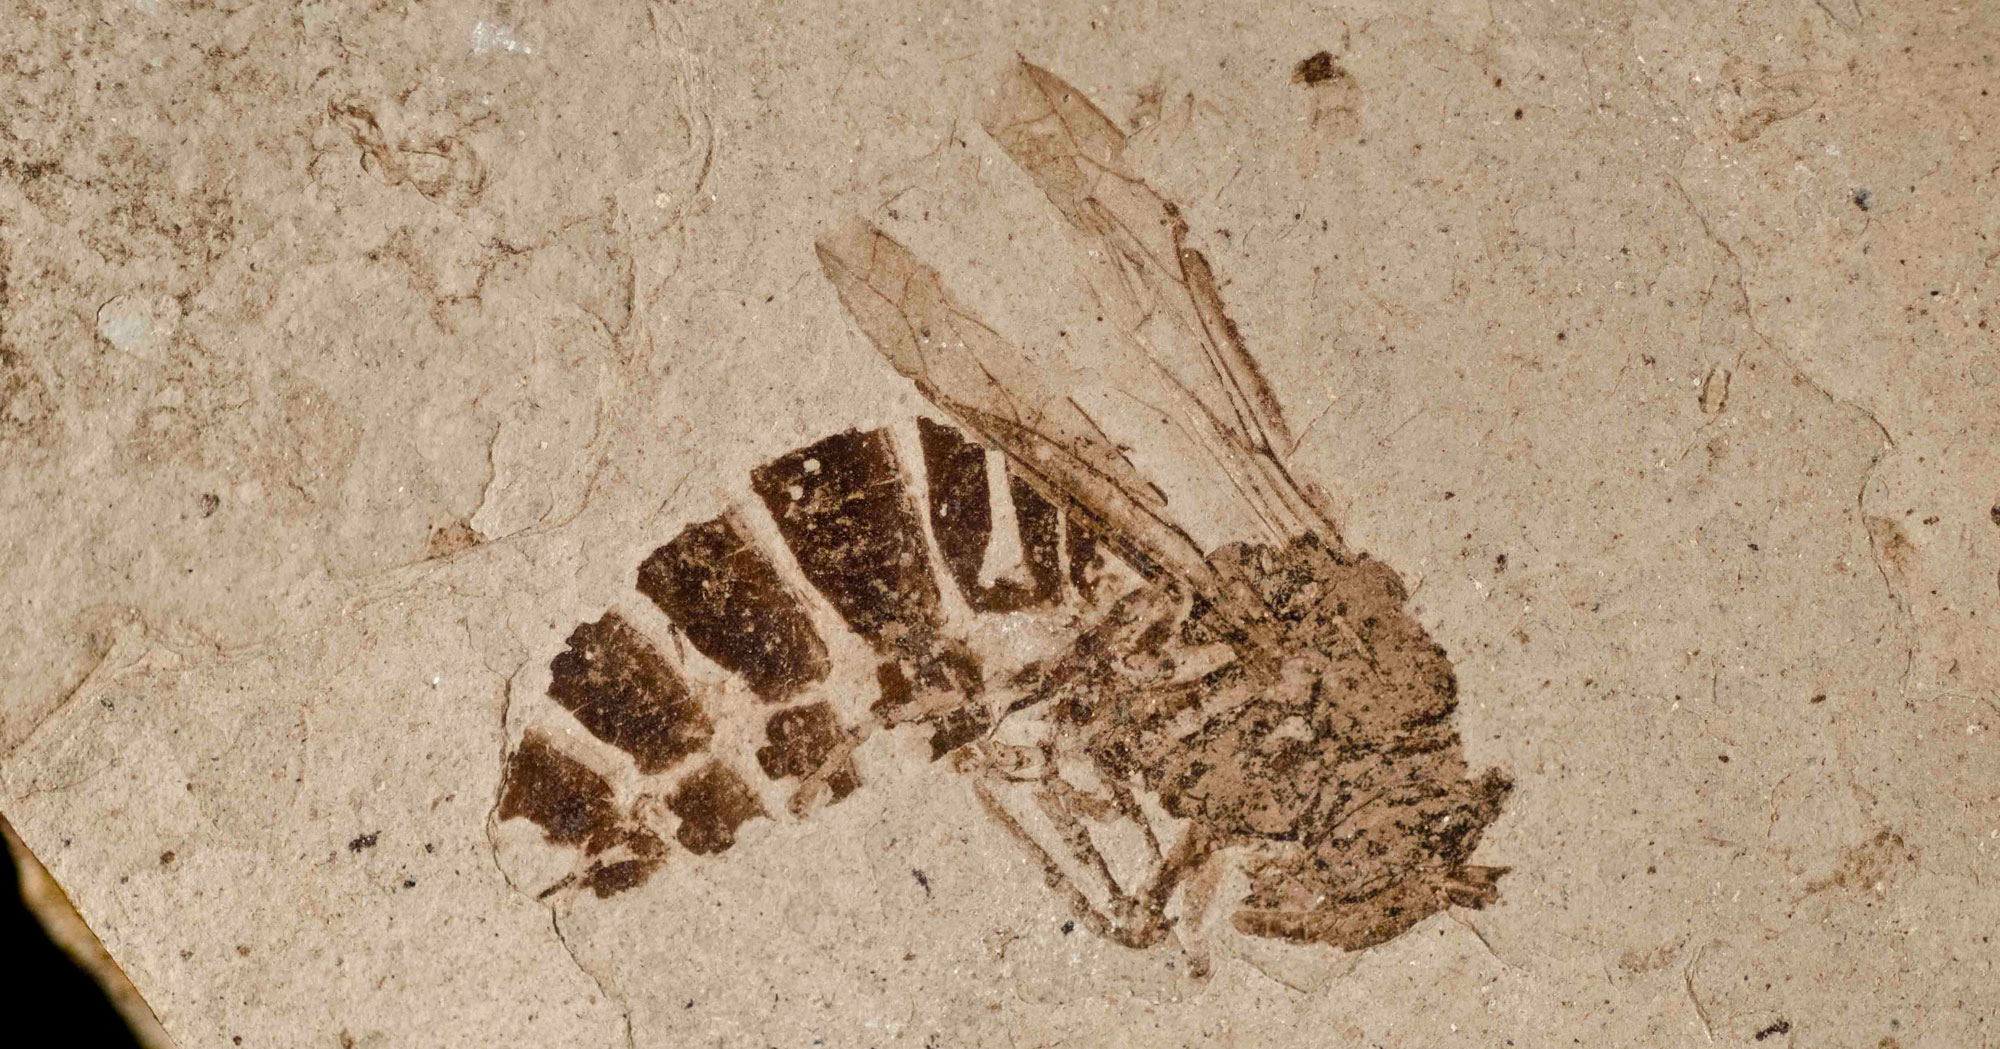 Photo showing a lateral (side) view of a relatively complete fossil yellow jacket.